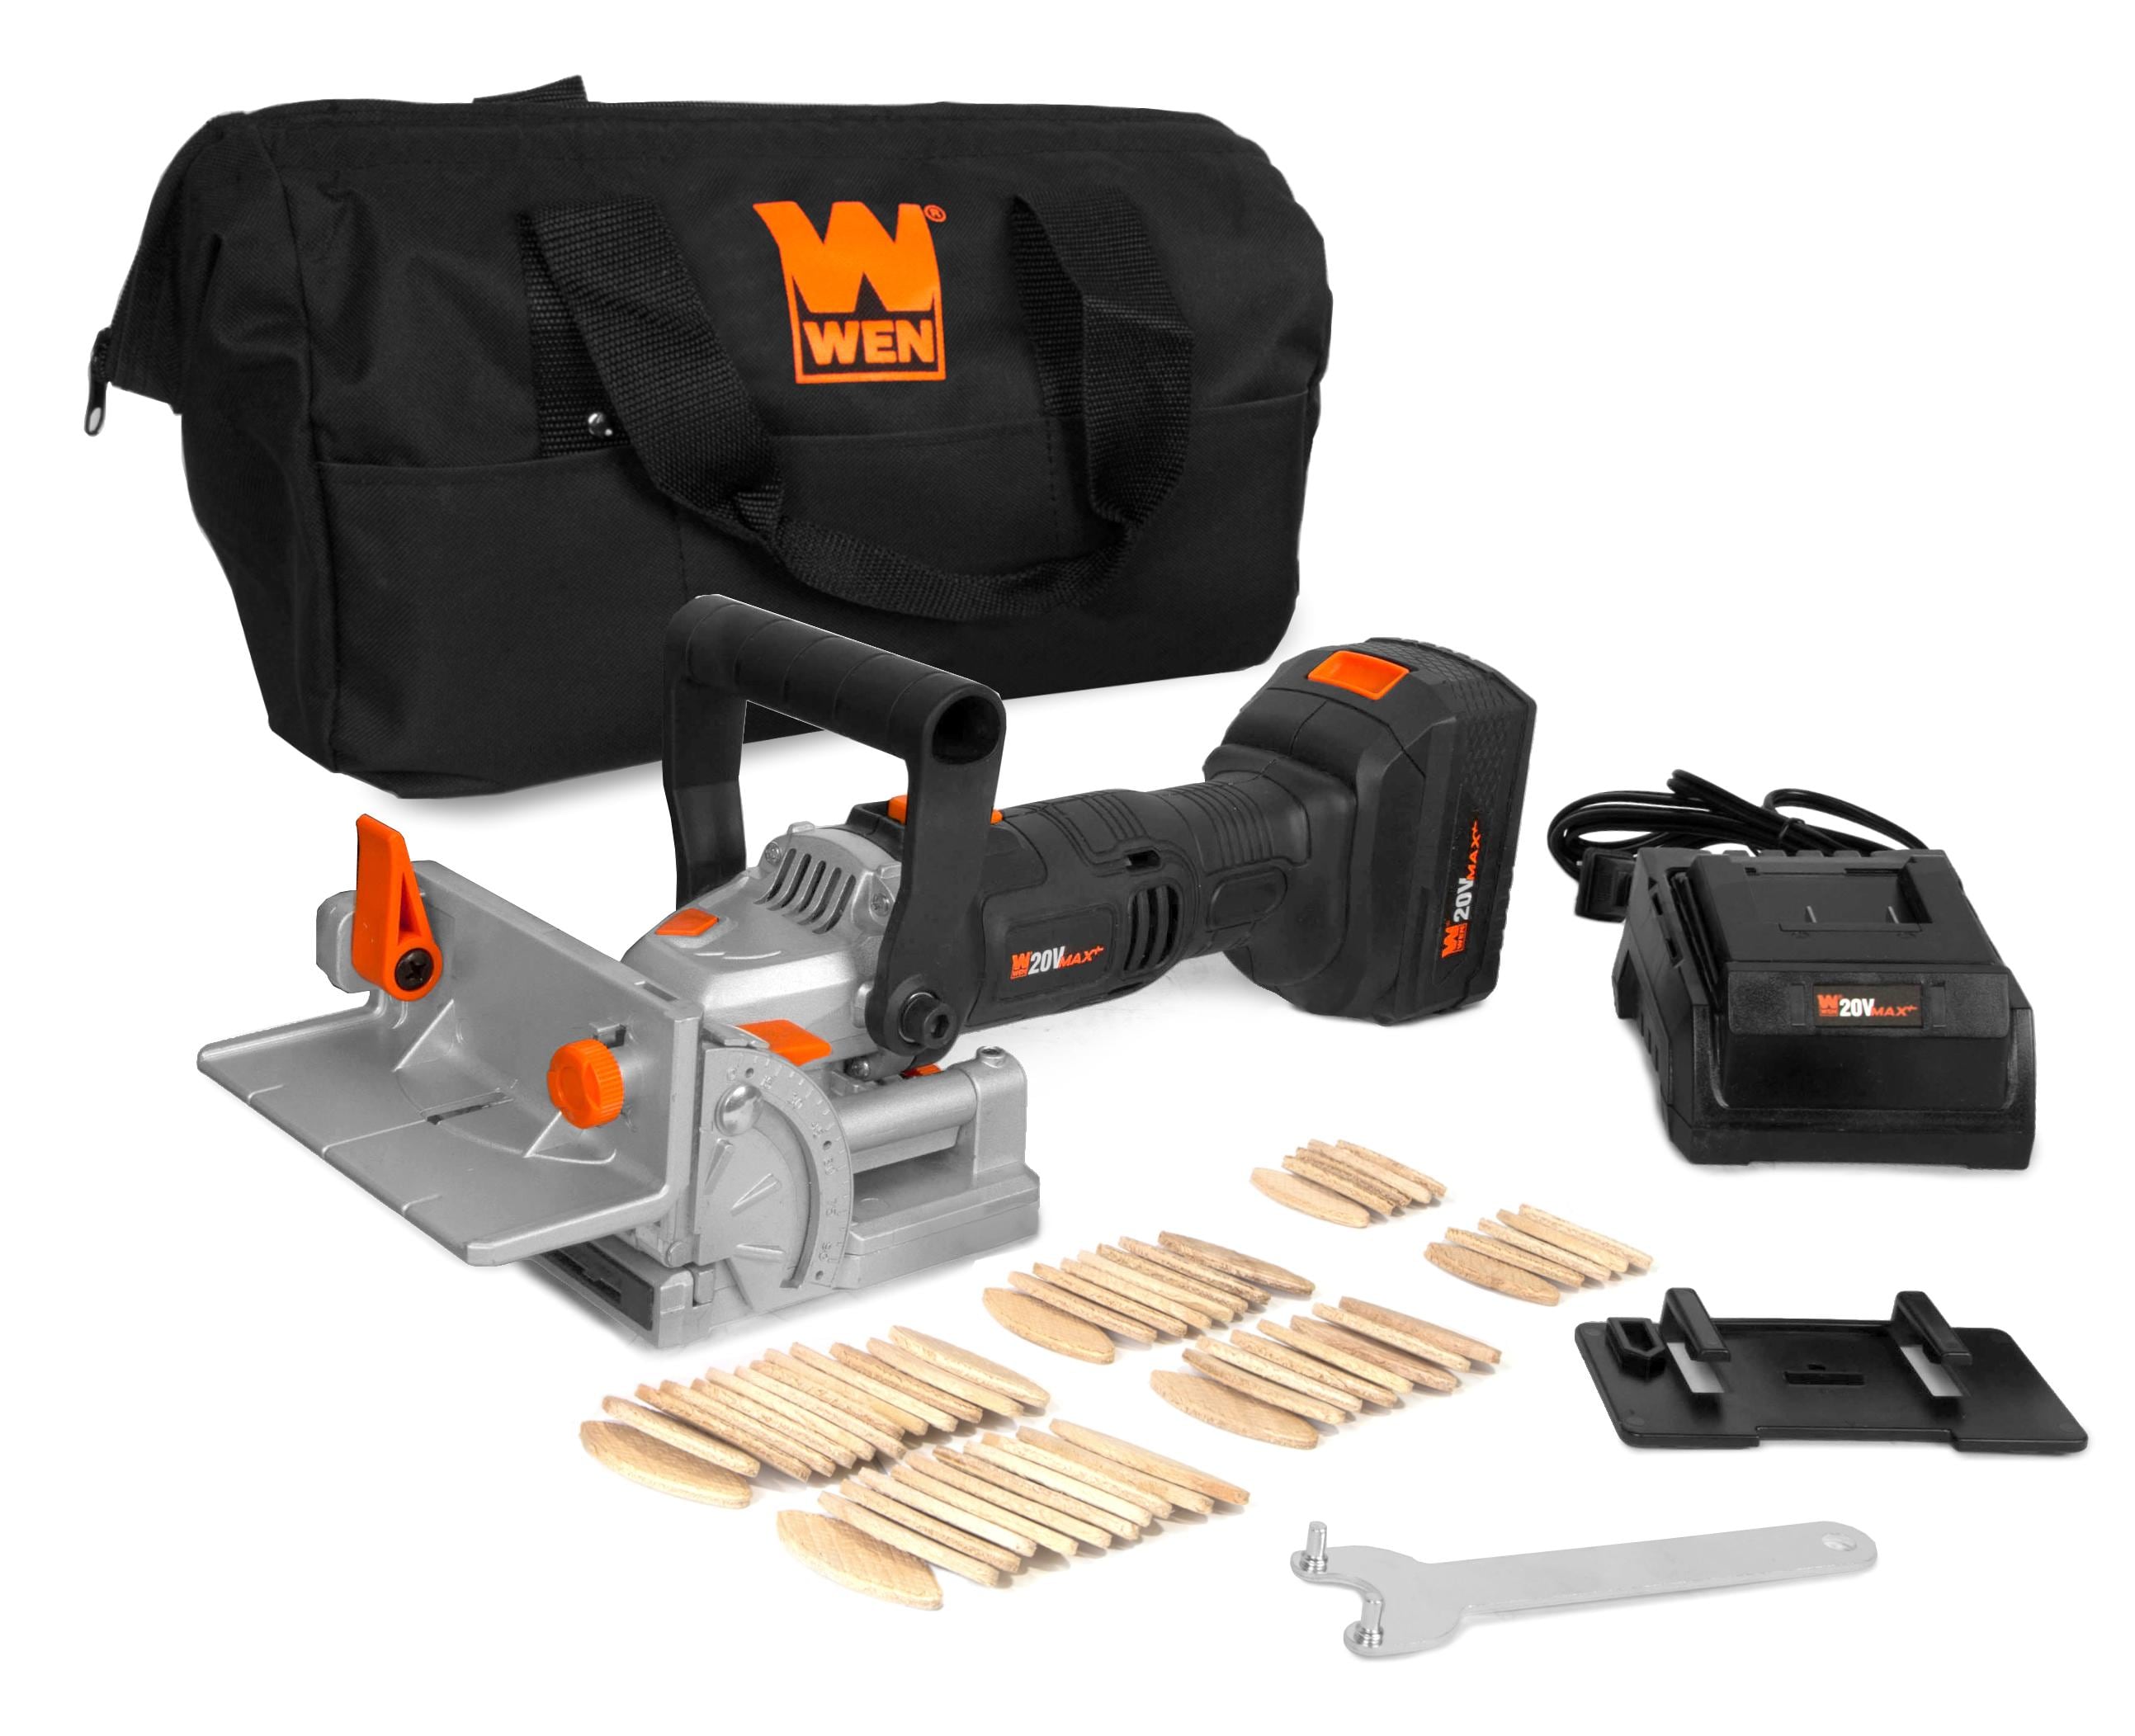 WEN JN8504 8.5 Amp Plate and Biscuit Joiner with Case and Biscuits